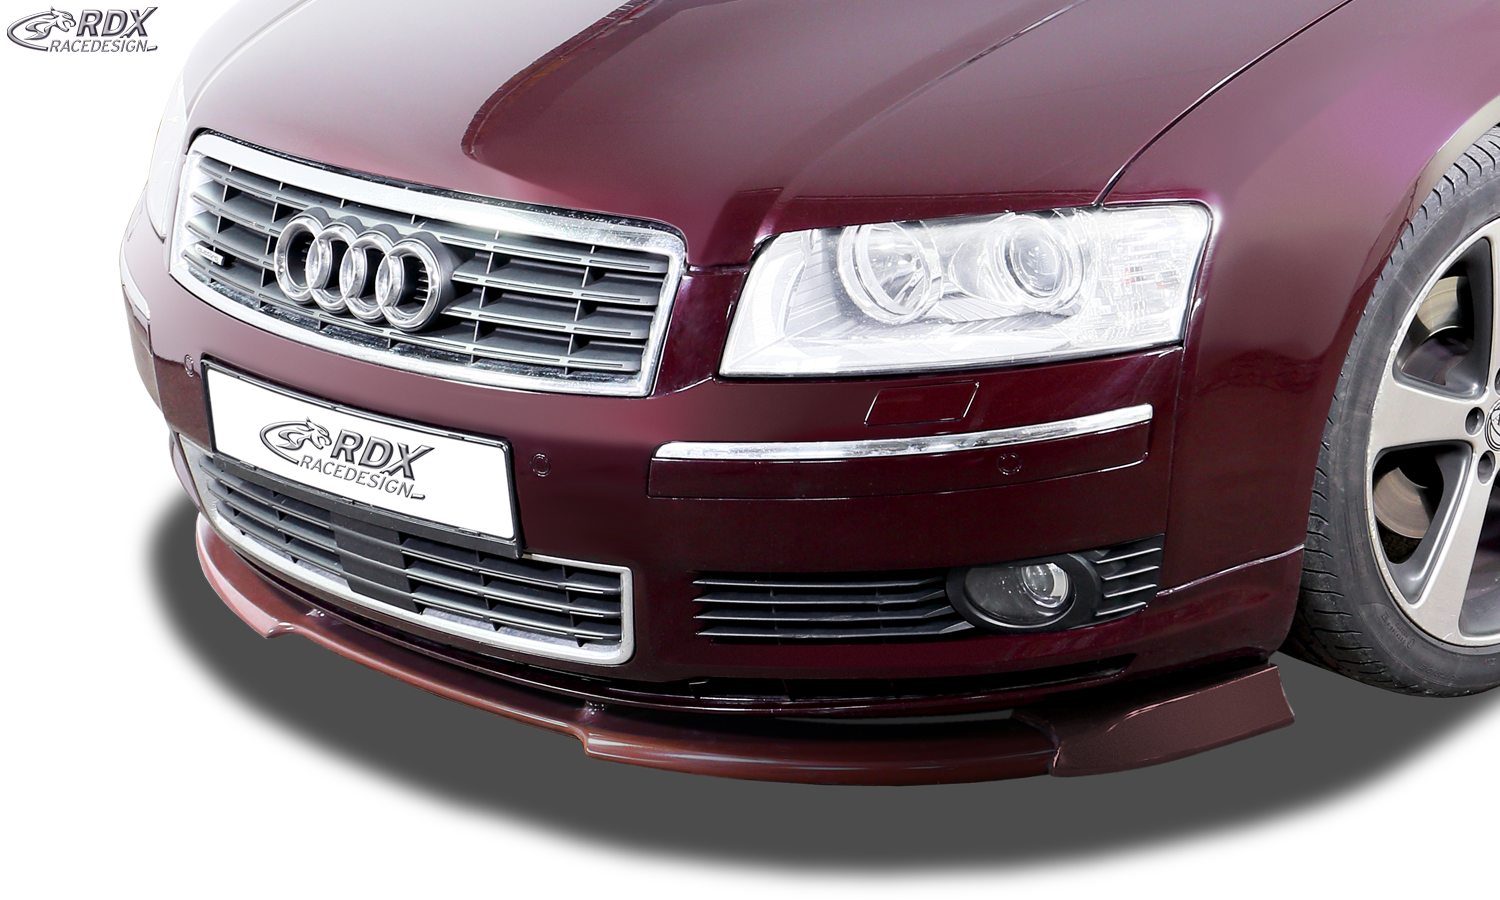 RDX Front Spoiler VARIO-X for AUDI A8 D3 / 4E -2005 (Alle, incl. W12 and S8) Front Lip Splitter